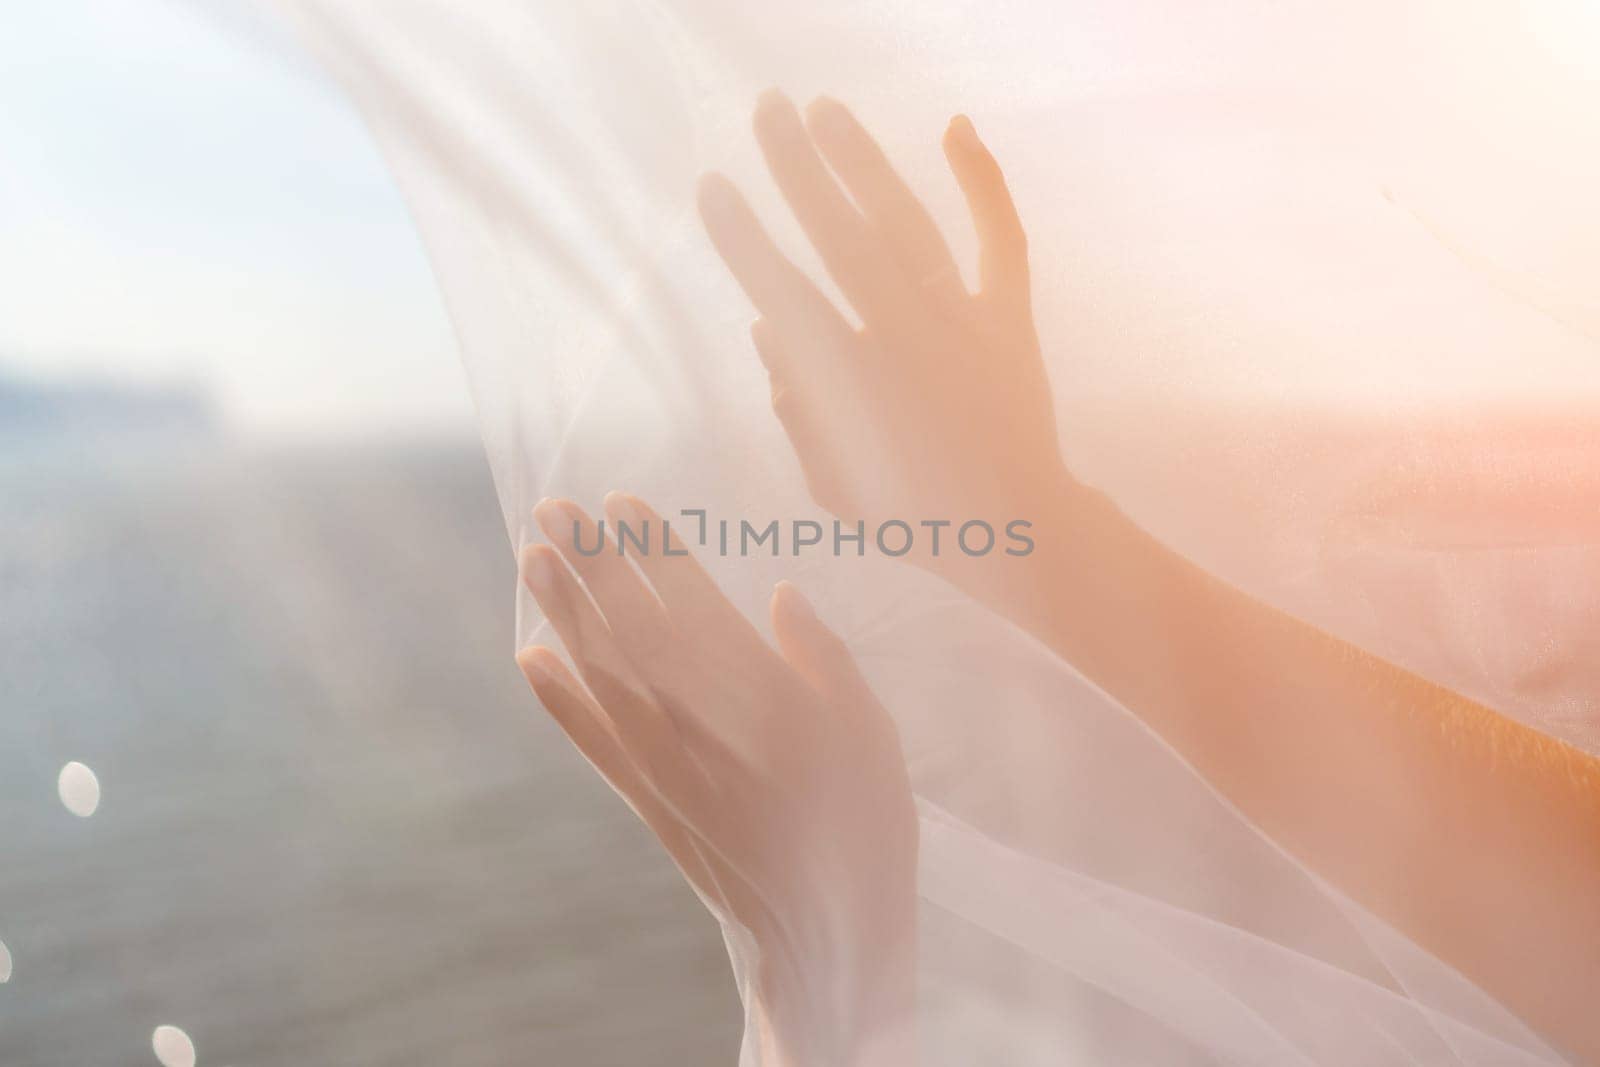 A woman stands on a beach with a white veil over her head. The scene is serene and peaceful, with the woman's gaze directed towards the water. by Matiunina